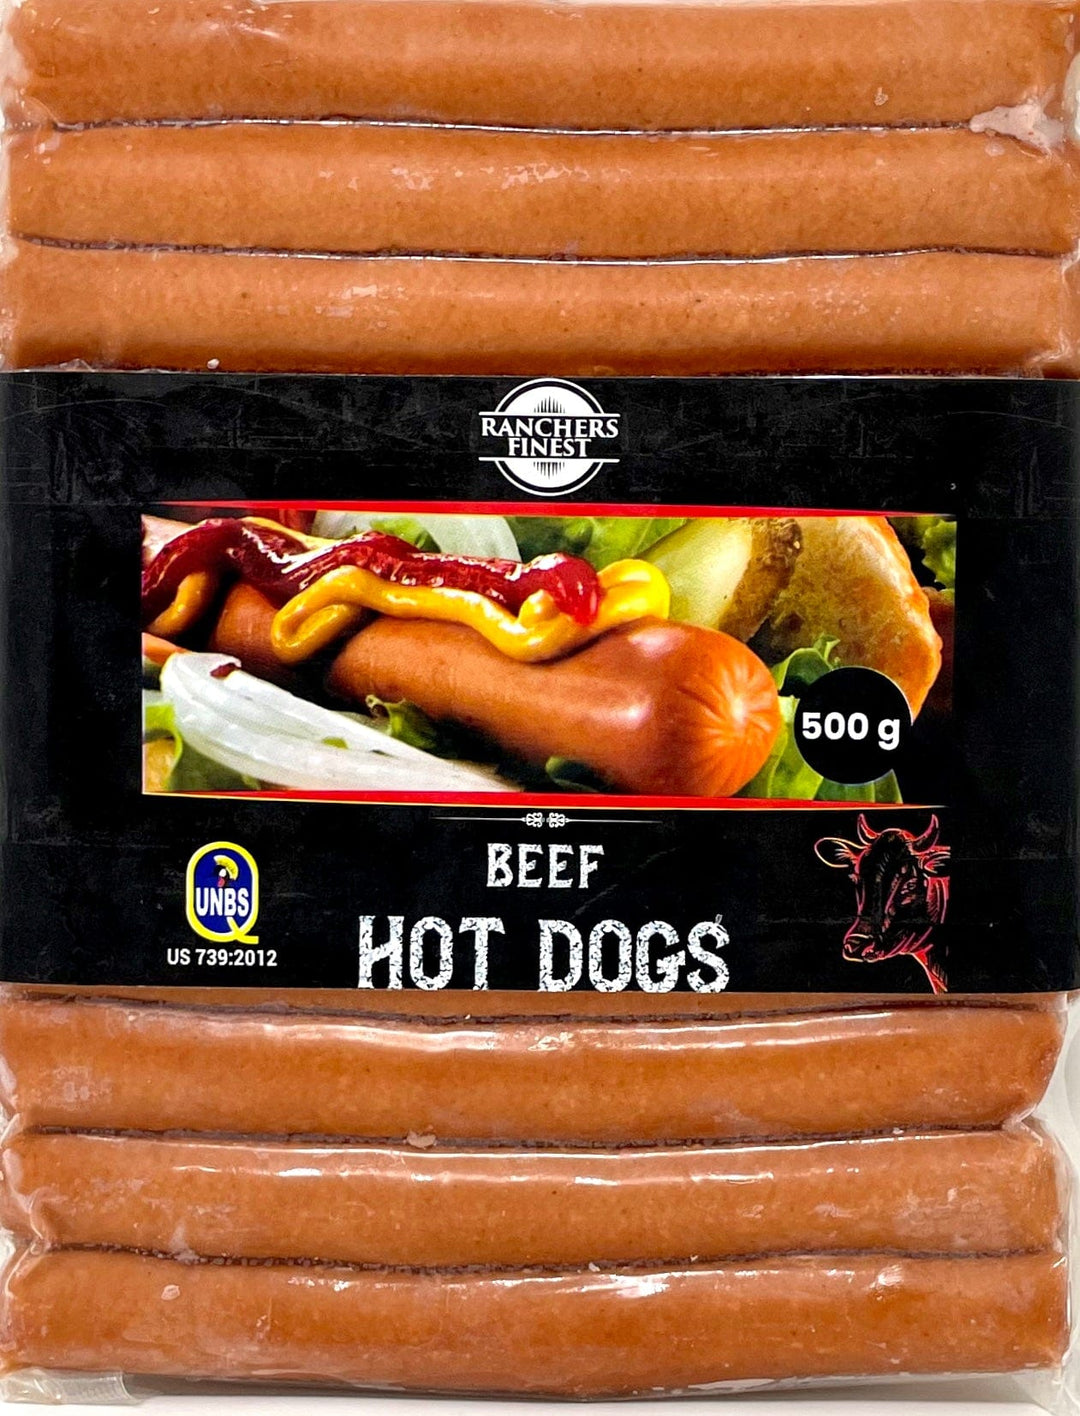 Ranchers Finest Beef Hot Dogs 500g